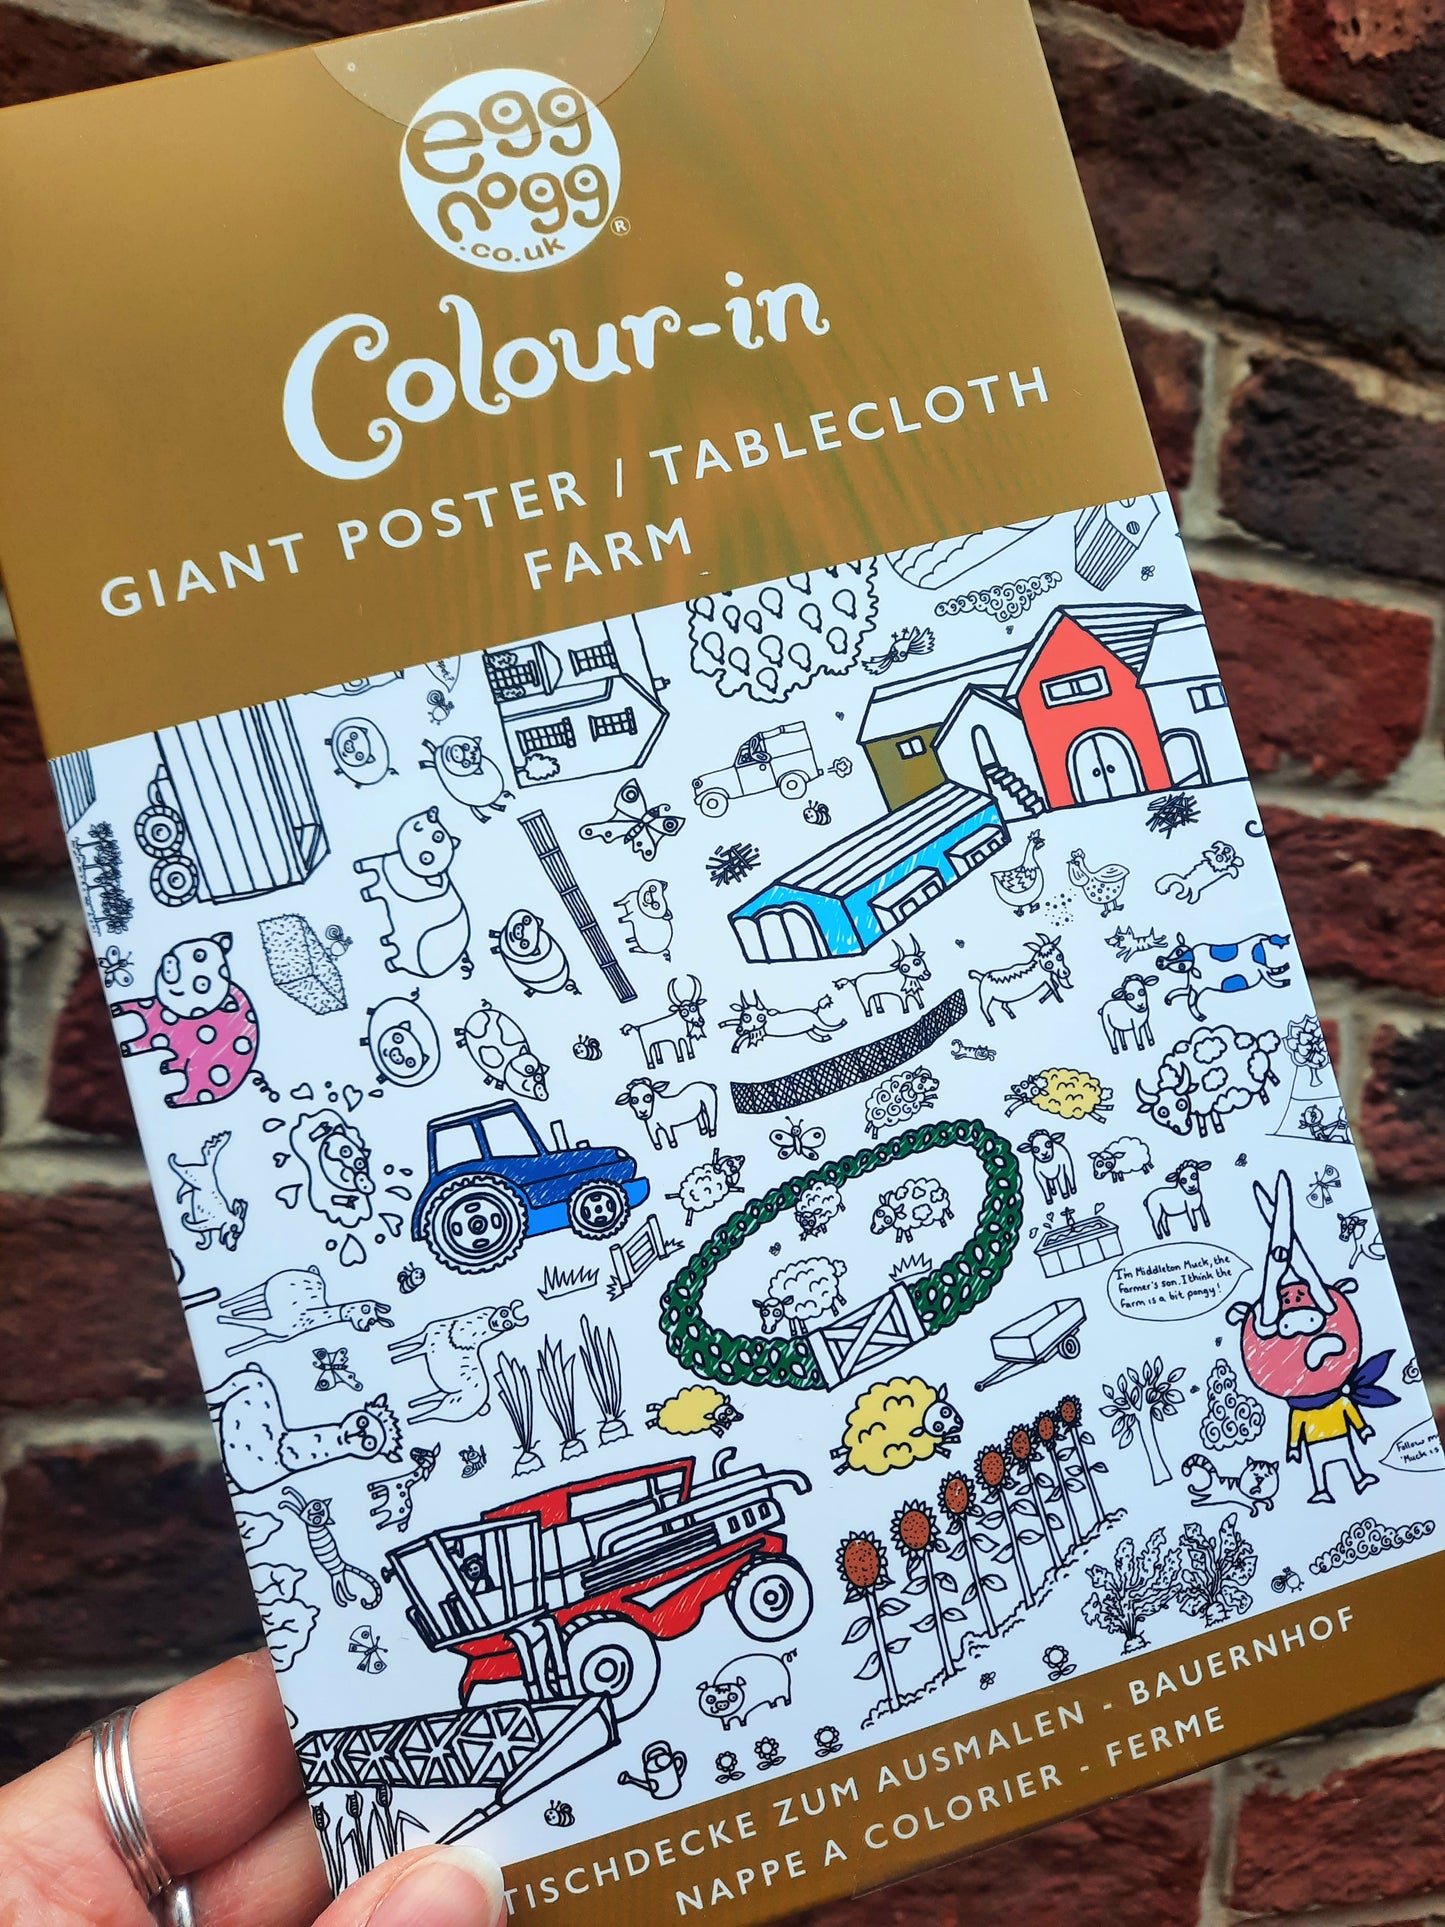 Farm Colour-In Giant Poster/Table Cloth